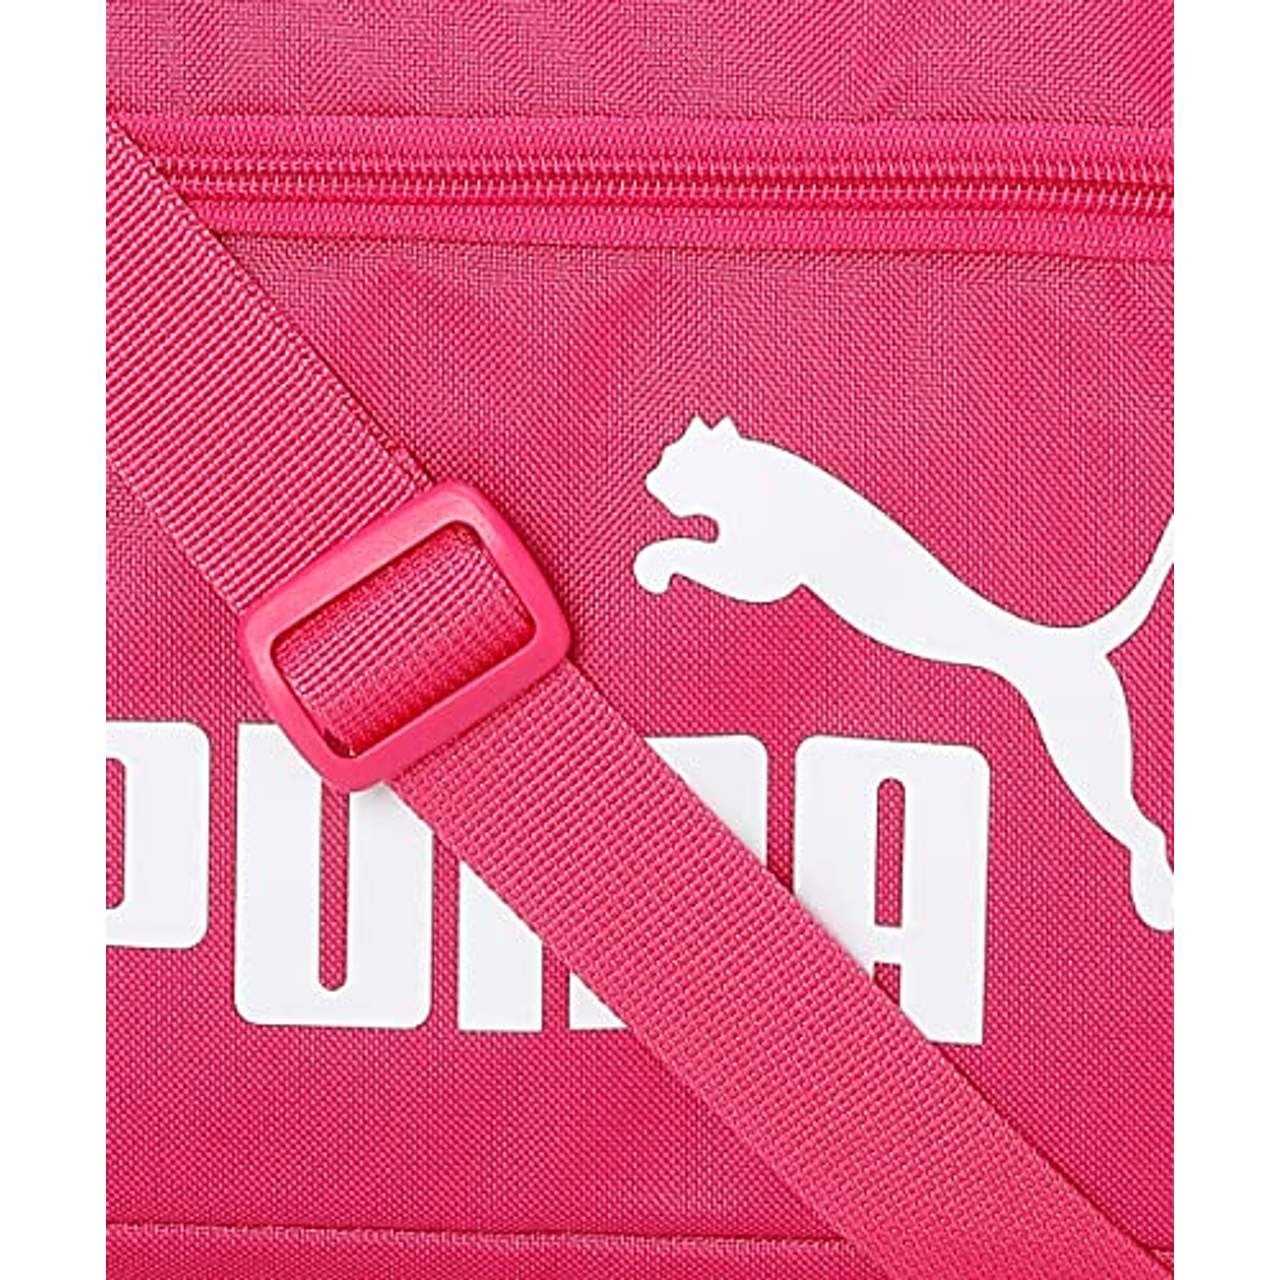 PUMA Sporttasche Phase Sports Bag 078033 Orchid Shadow One Size